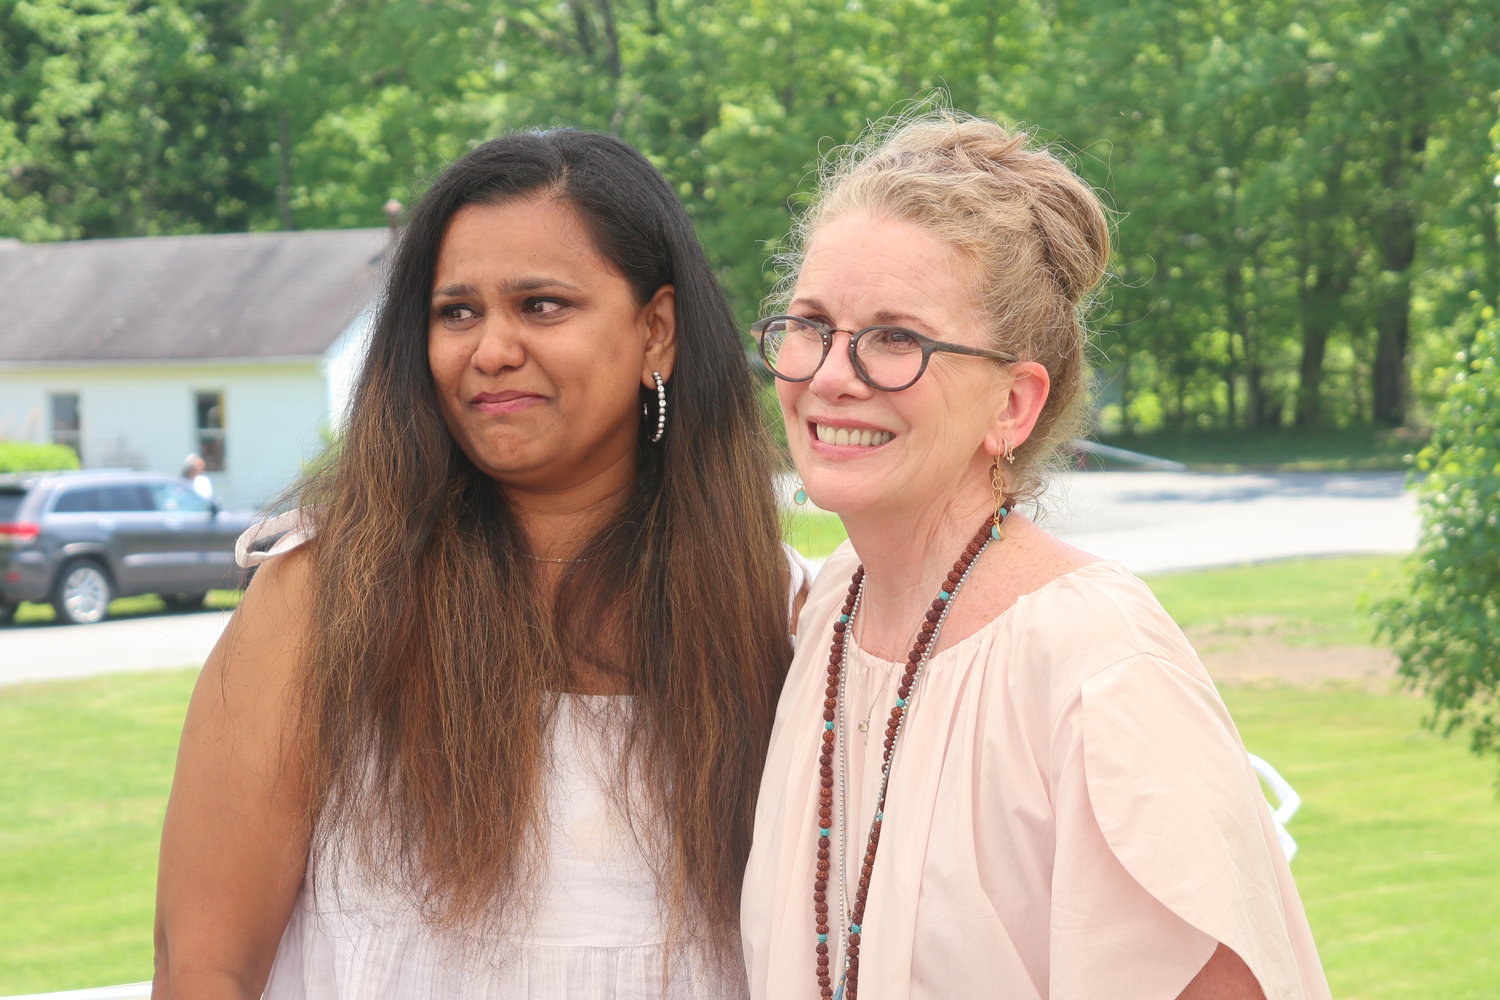 Geetha Natarajan, from Wayne, NJ, was overcome with emotion at the opportunity to meet her idol Melissa Gilbert. "I still watch the seven seasons of Half Pint all of the time. I still can't believe I have met her now, she said.